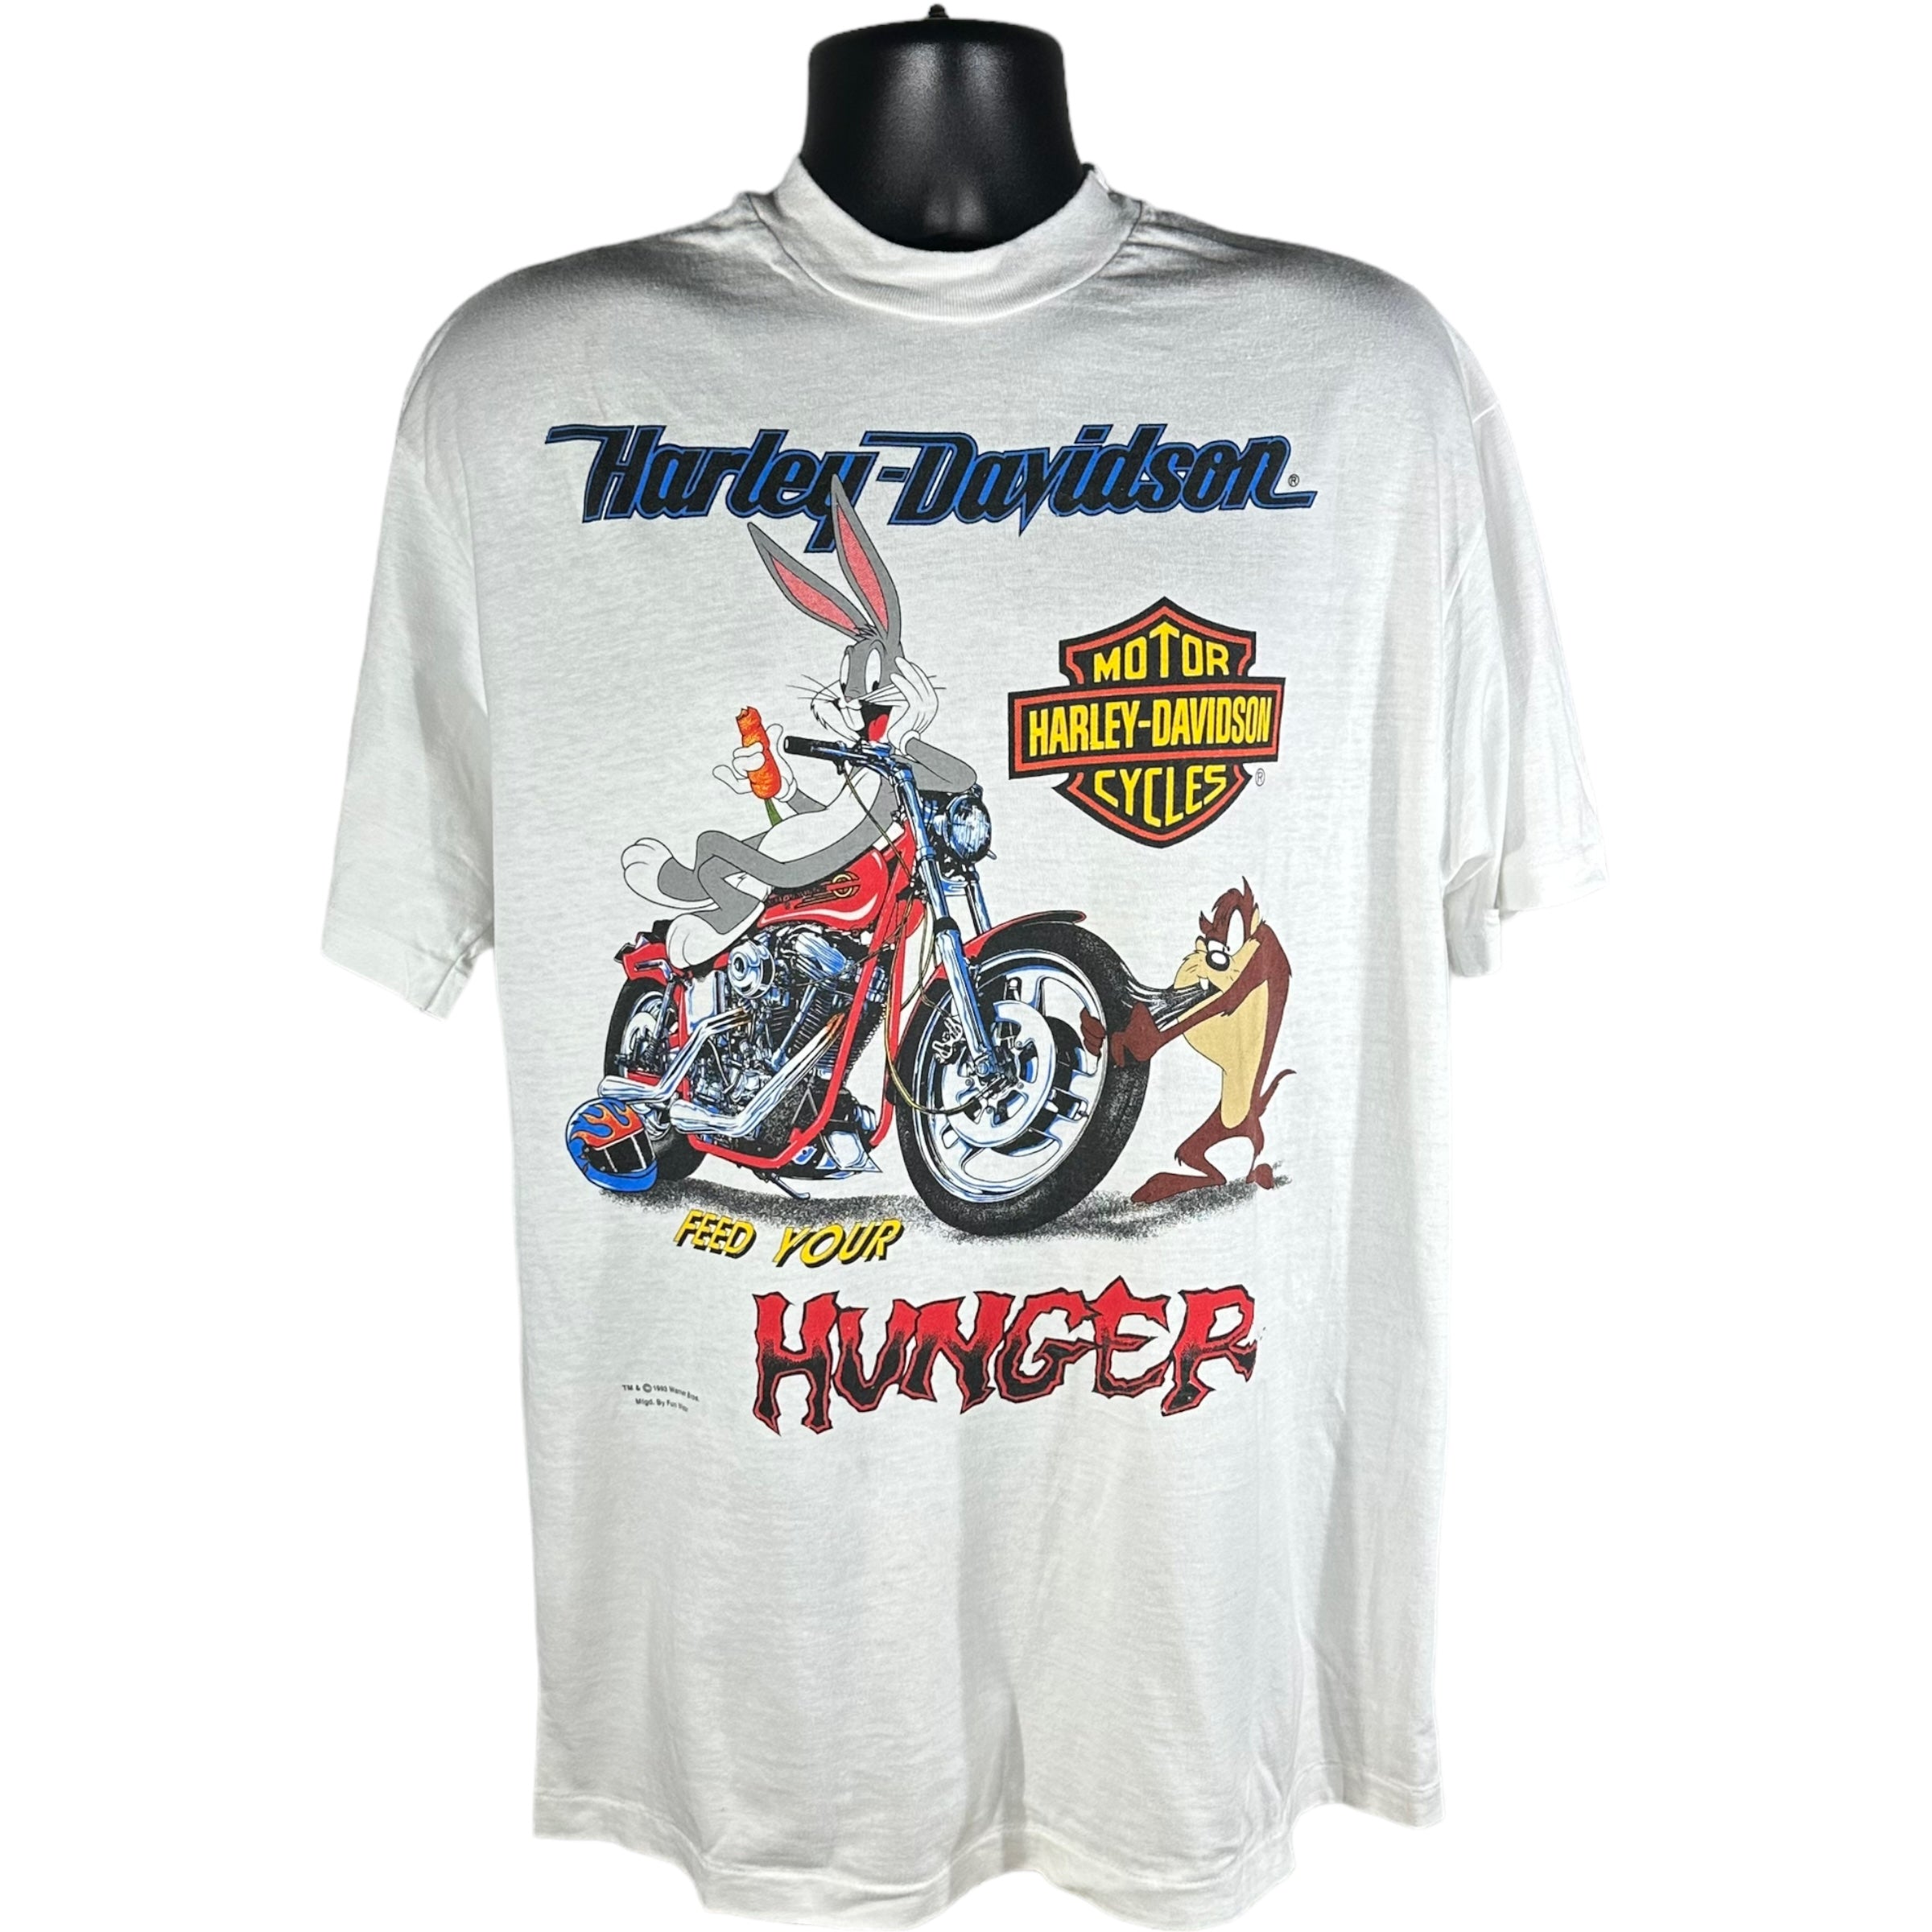 Vintage Harley Davidson "Feed Your Hunger" Taz & Bugs Tee 1993